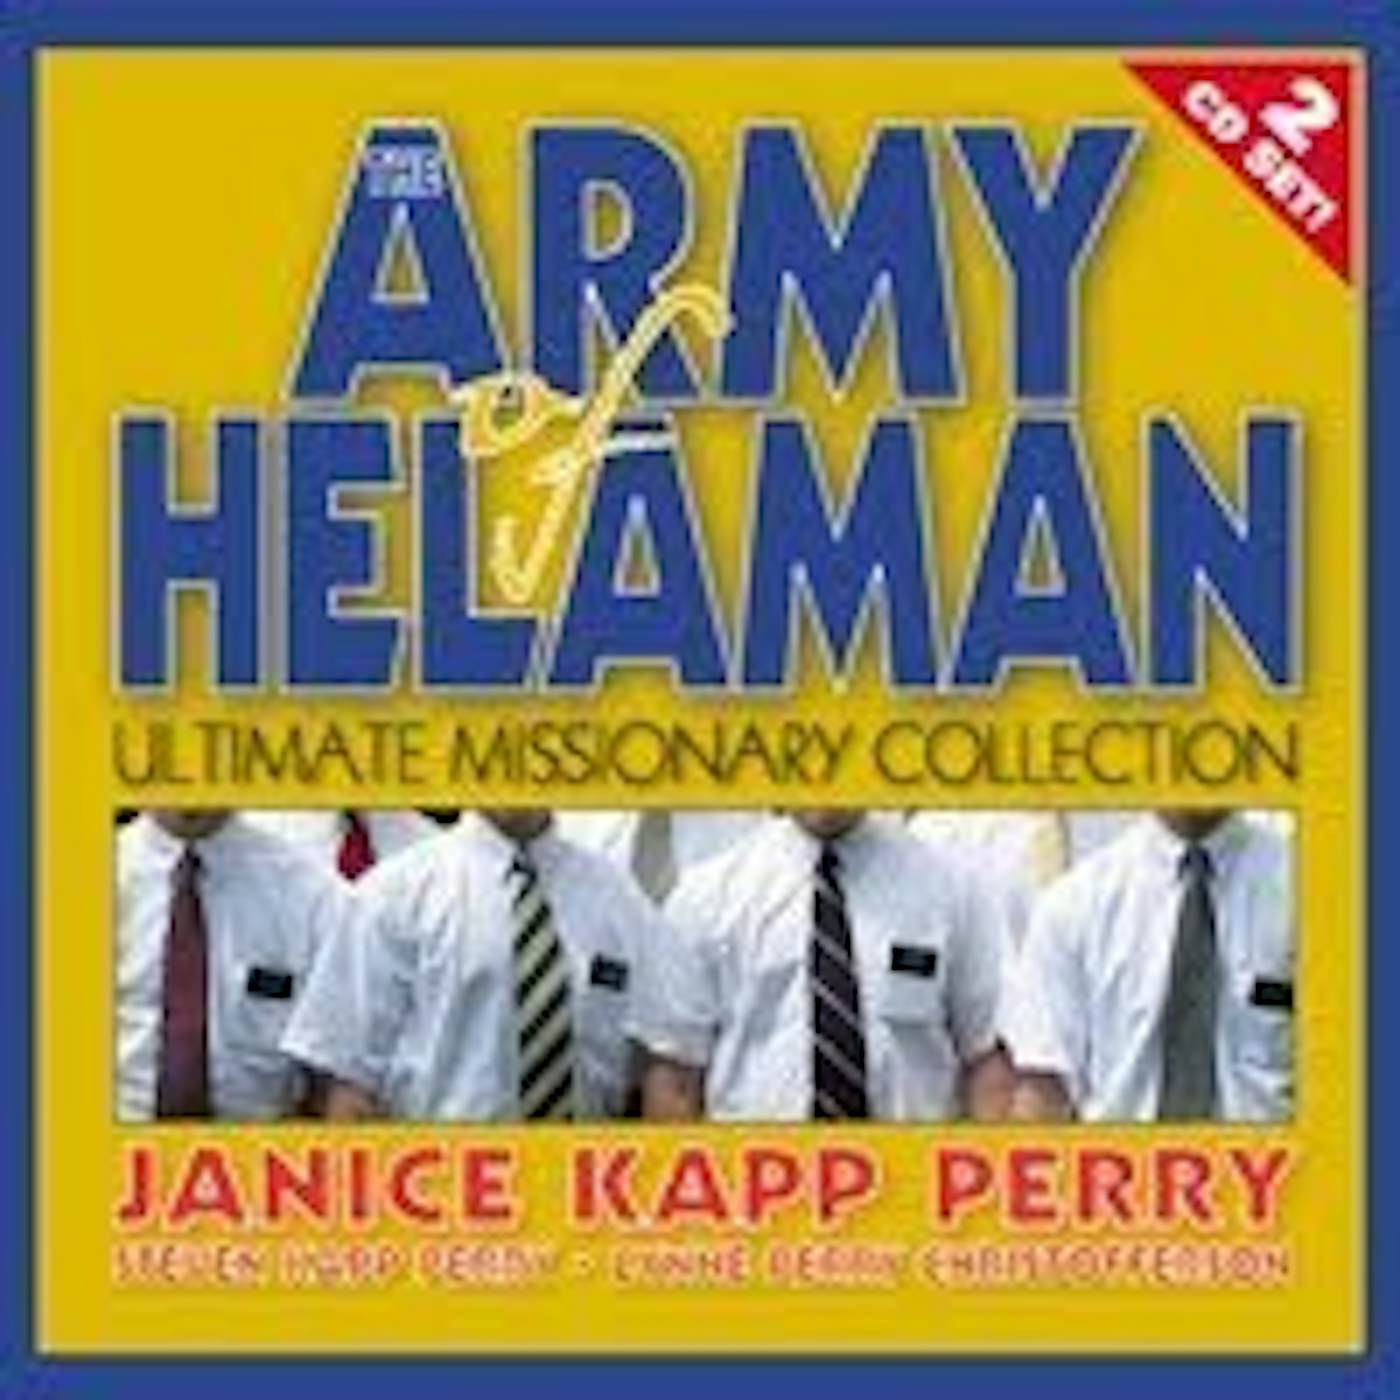 Janice Kapp Perry ARMY OF HELAMAN: ULTIMATE MISSIONARY COLLECTION CD